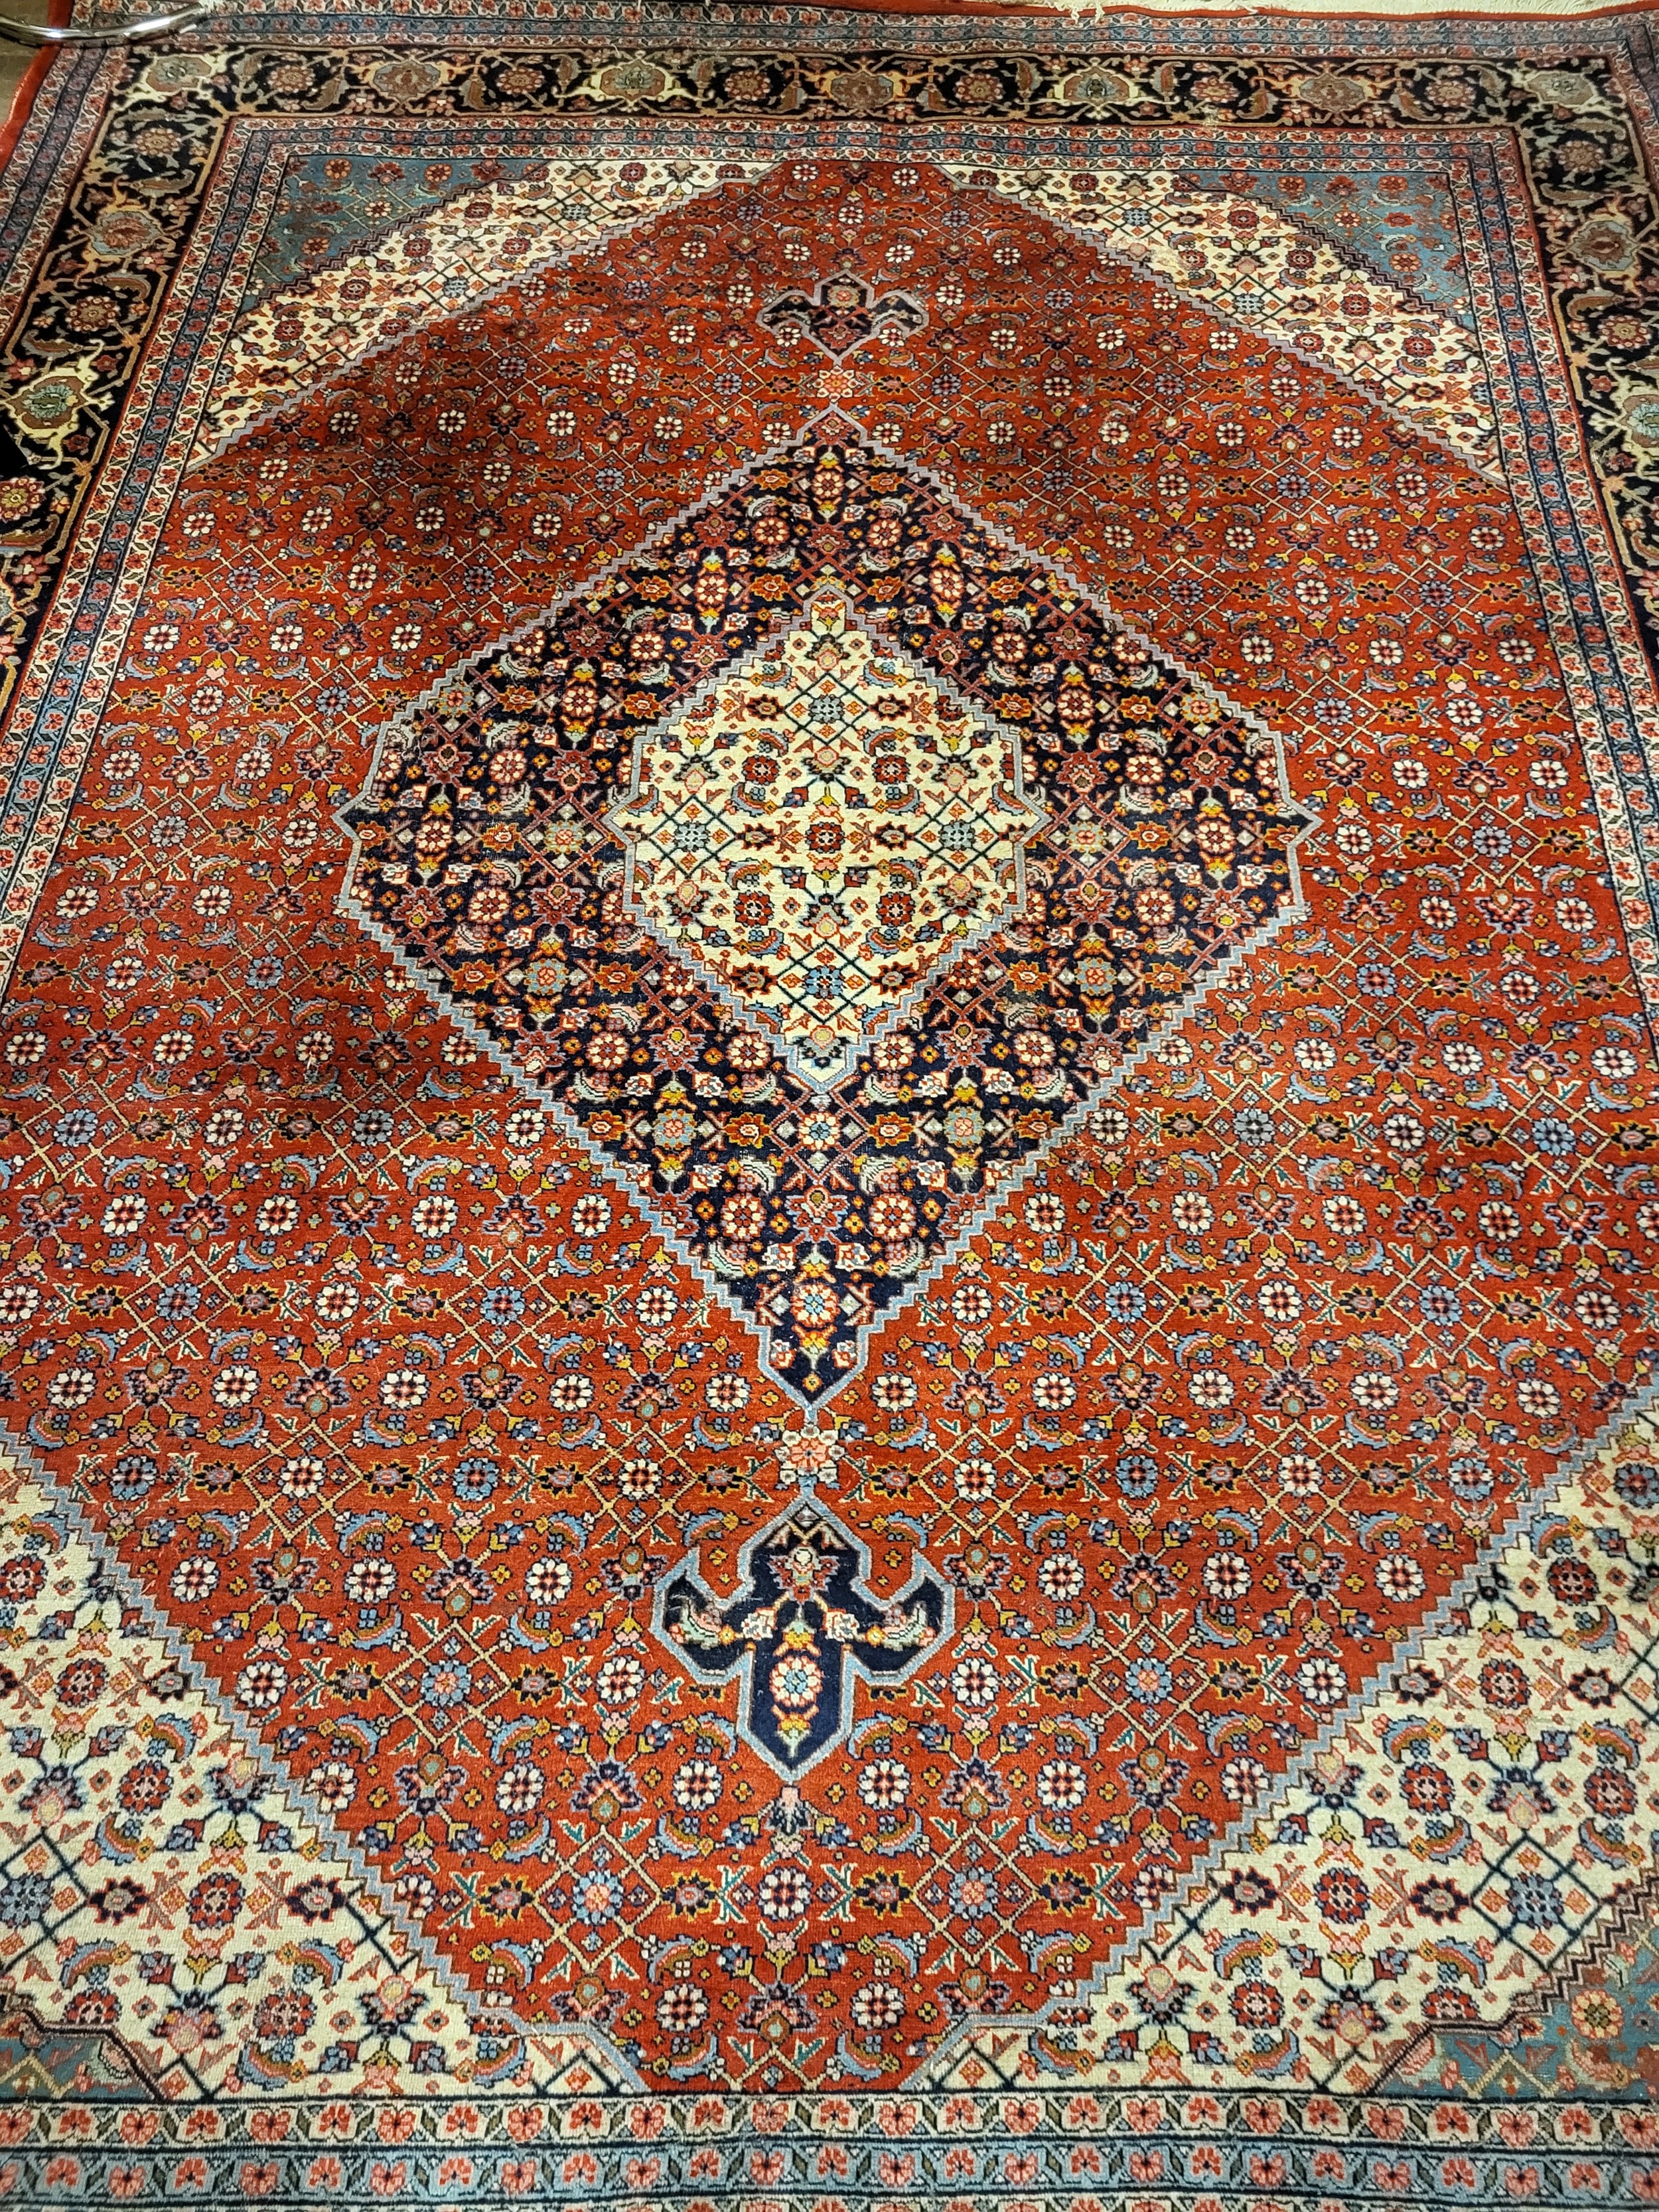 A LARGE INDIAN WOOLLEN RUG OF MIDDLE EASTERN DESIGN With central floral fields contained in seven